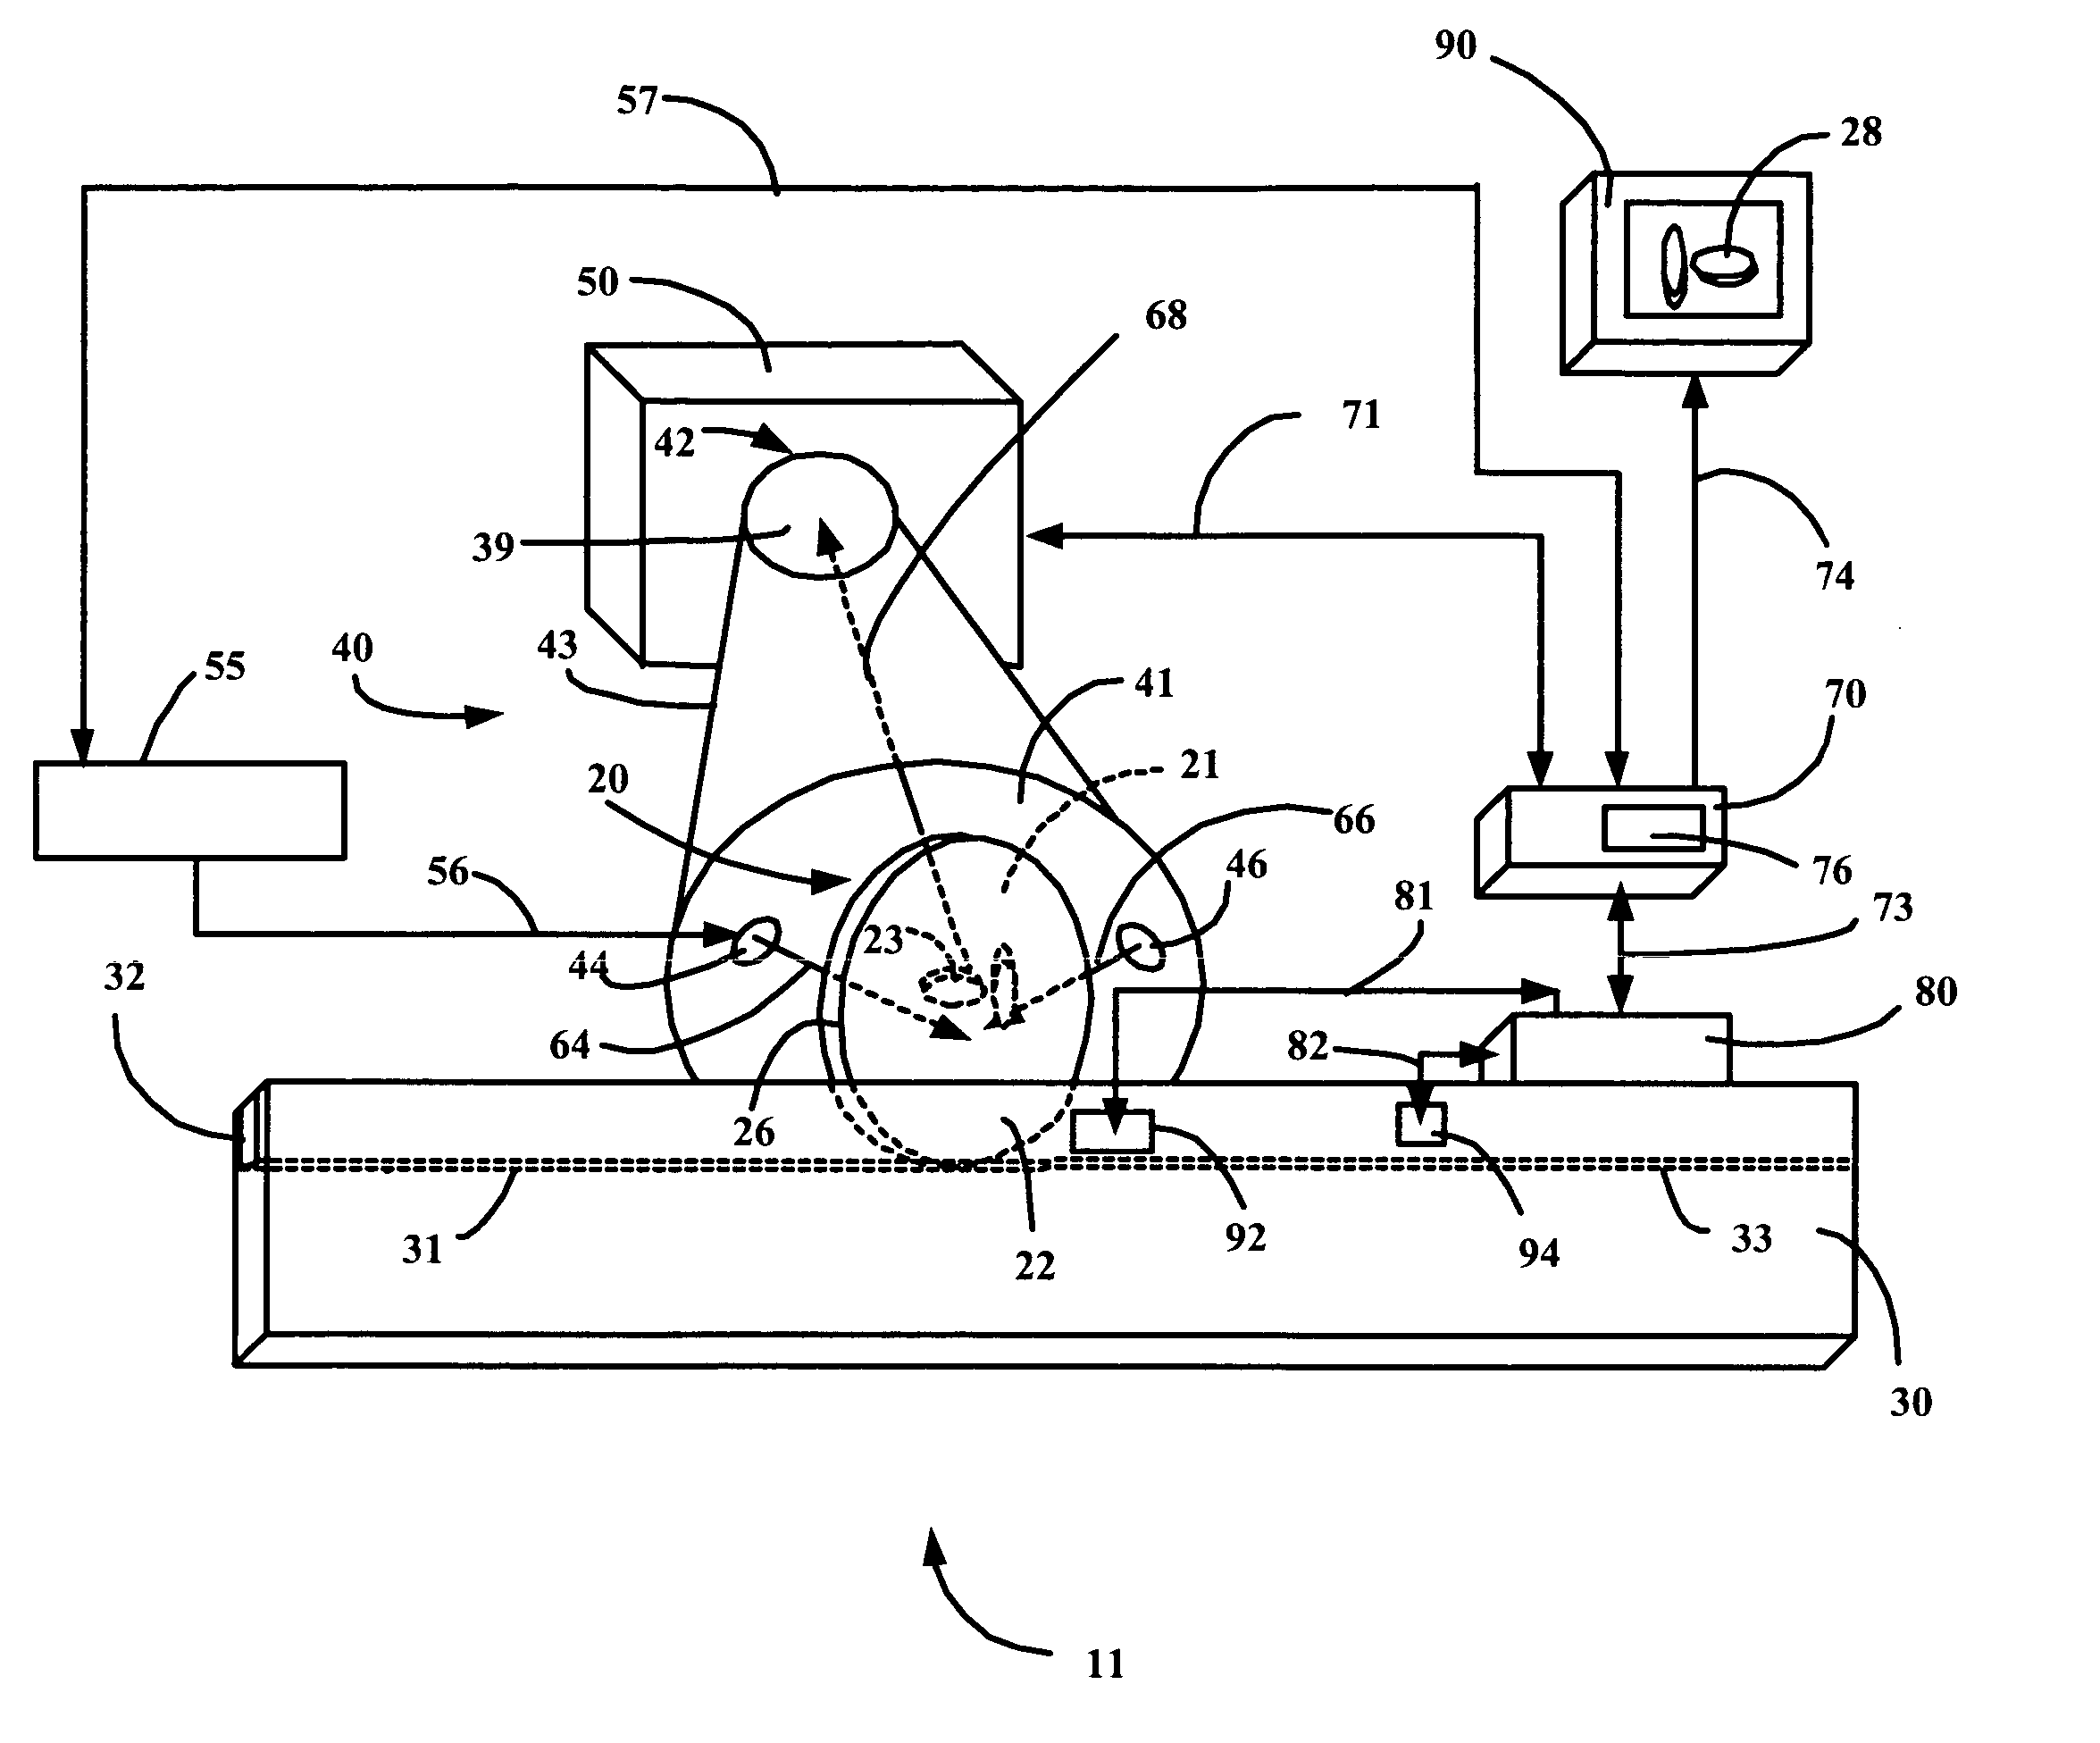 Optical inspection system for reconstructing three-dimensional images of coins and for sorting coins